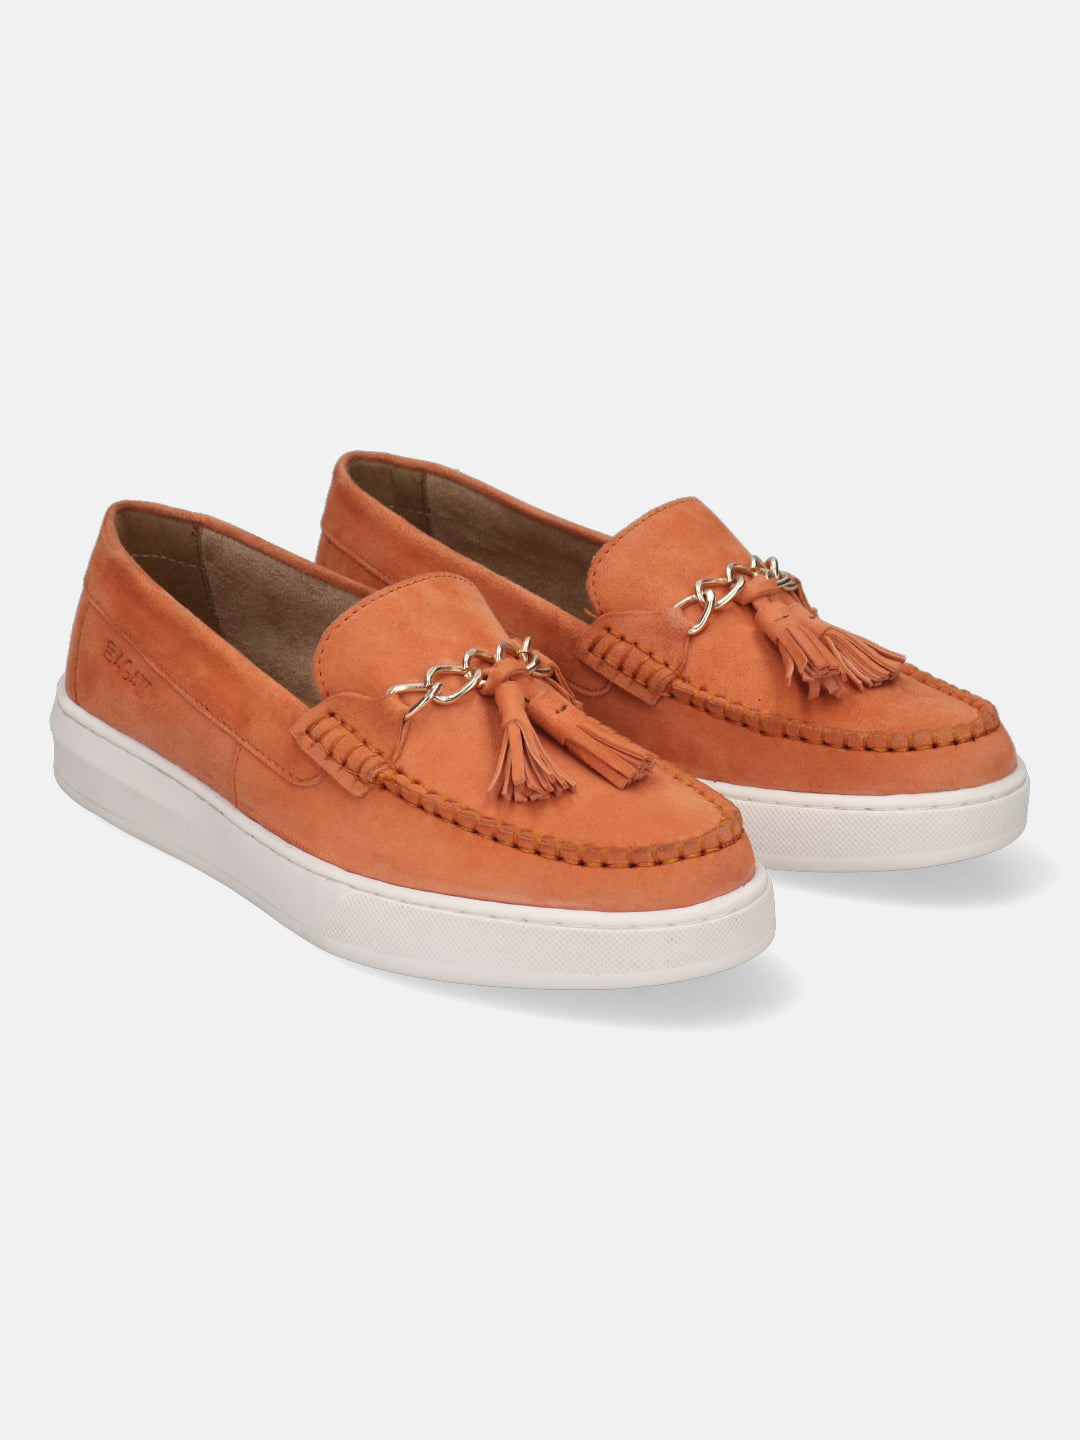 Slip On - Casual - Women's | Schuler Shoes